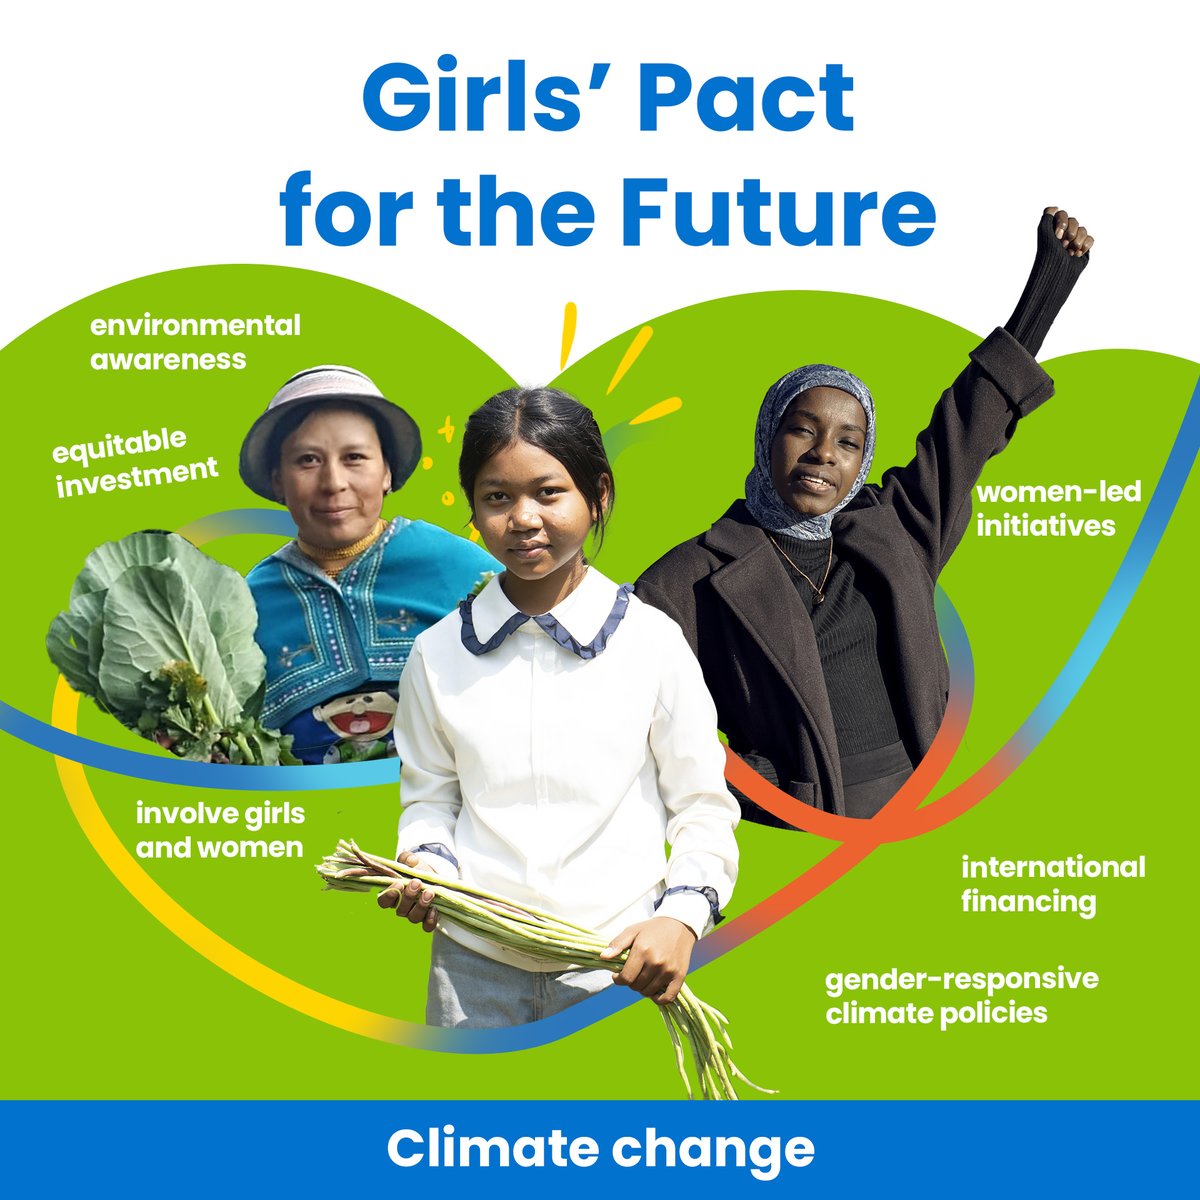 “We witness the disproportionate impact of the #ClimateCrisis on marginalised communities” - In the Girls’ Pact for the Future, young people are demanding leaders actively involve girls and women in the decision-making and implementation of climate mitigation measures